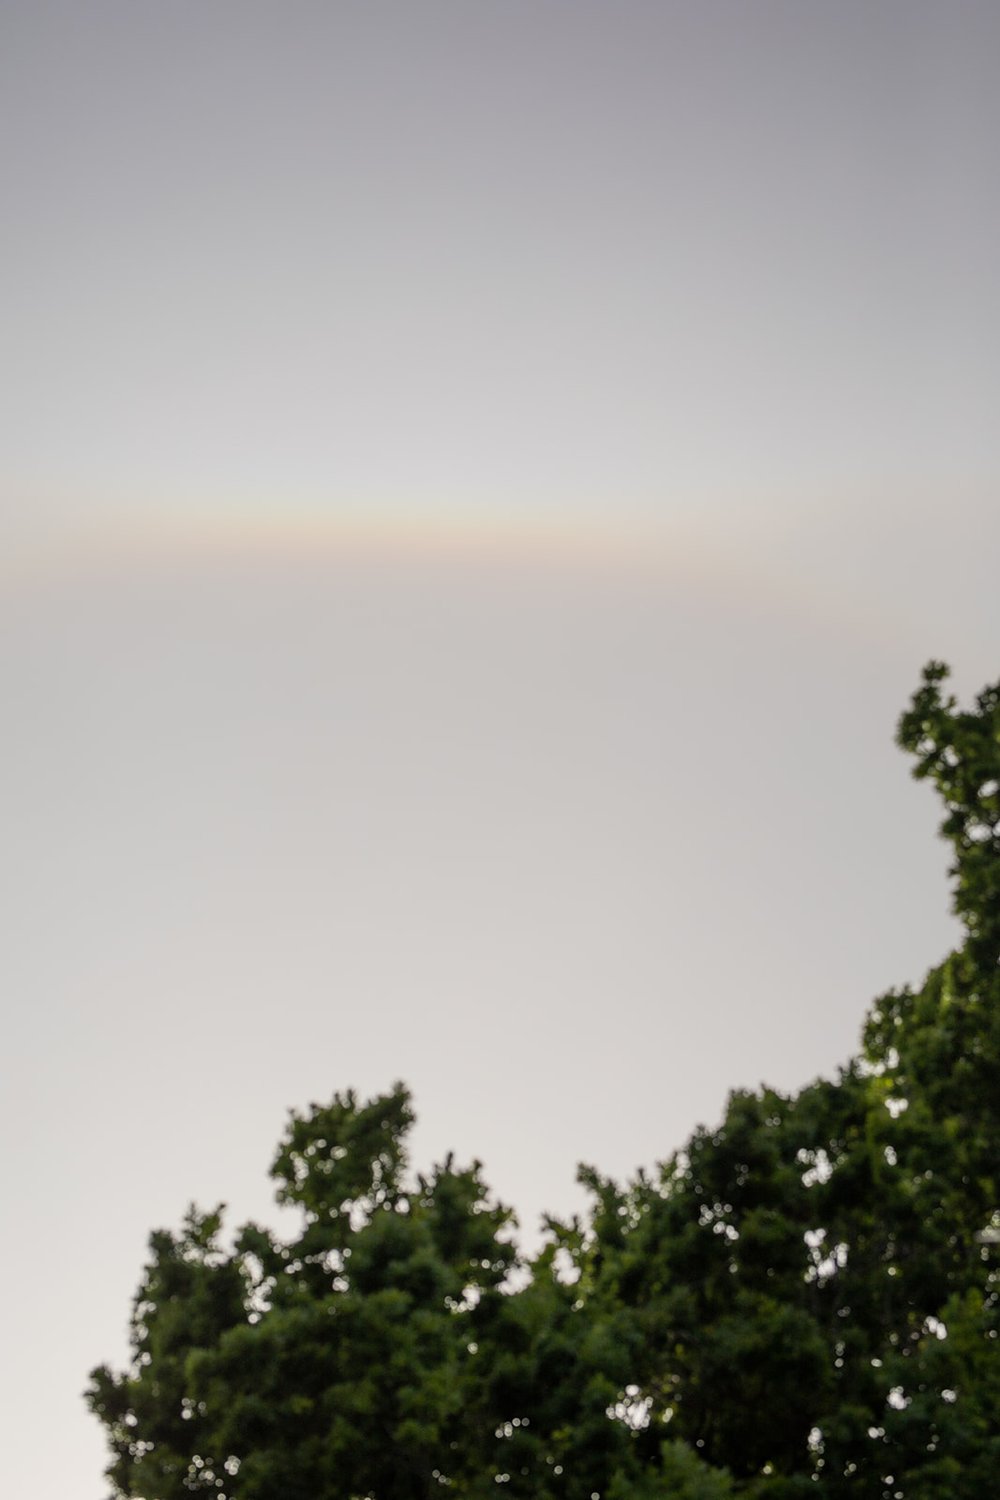 pacific-engagements-ruth-bancroft-gardens-wedding-ceremony-rainbow-in-sky-sam-minter-photography